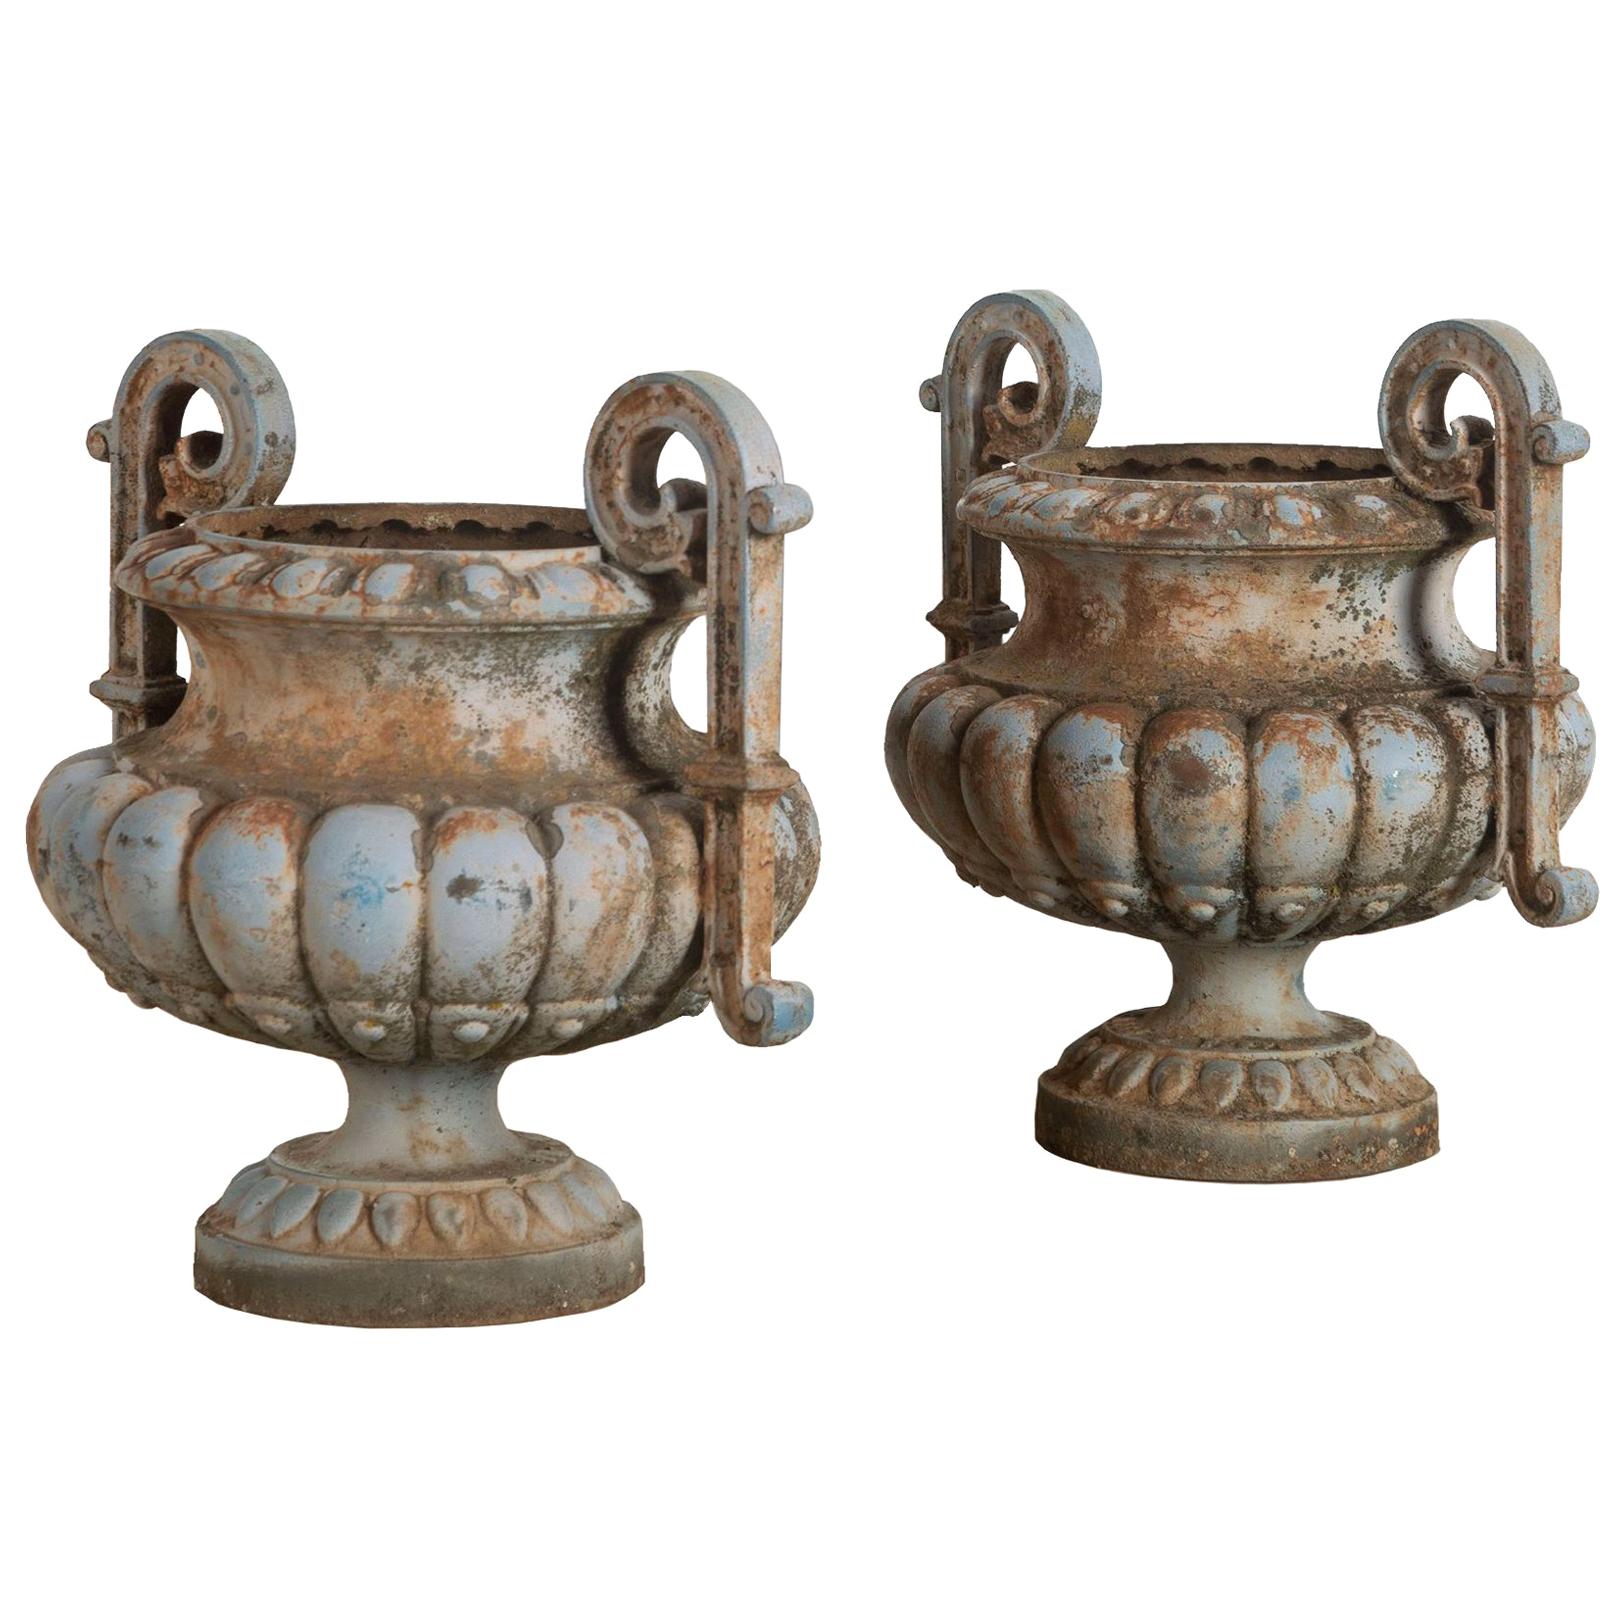 Pair of Late 19th Century Urns with Decorative Pale Blue Patina